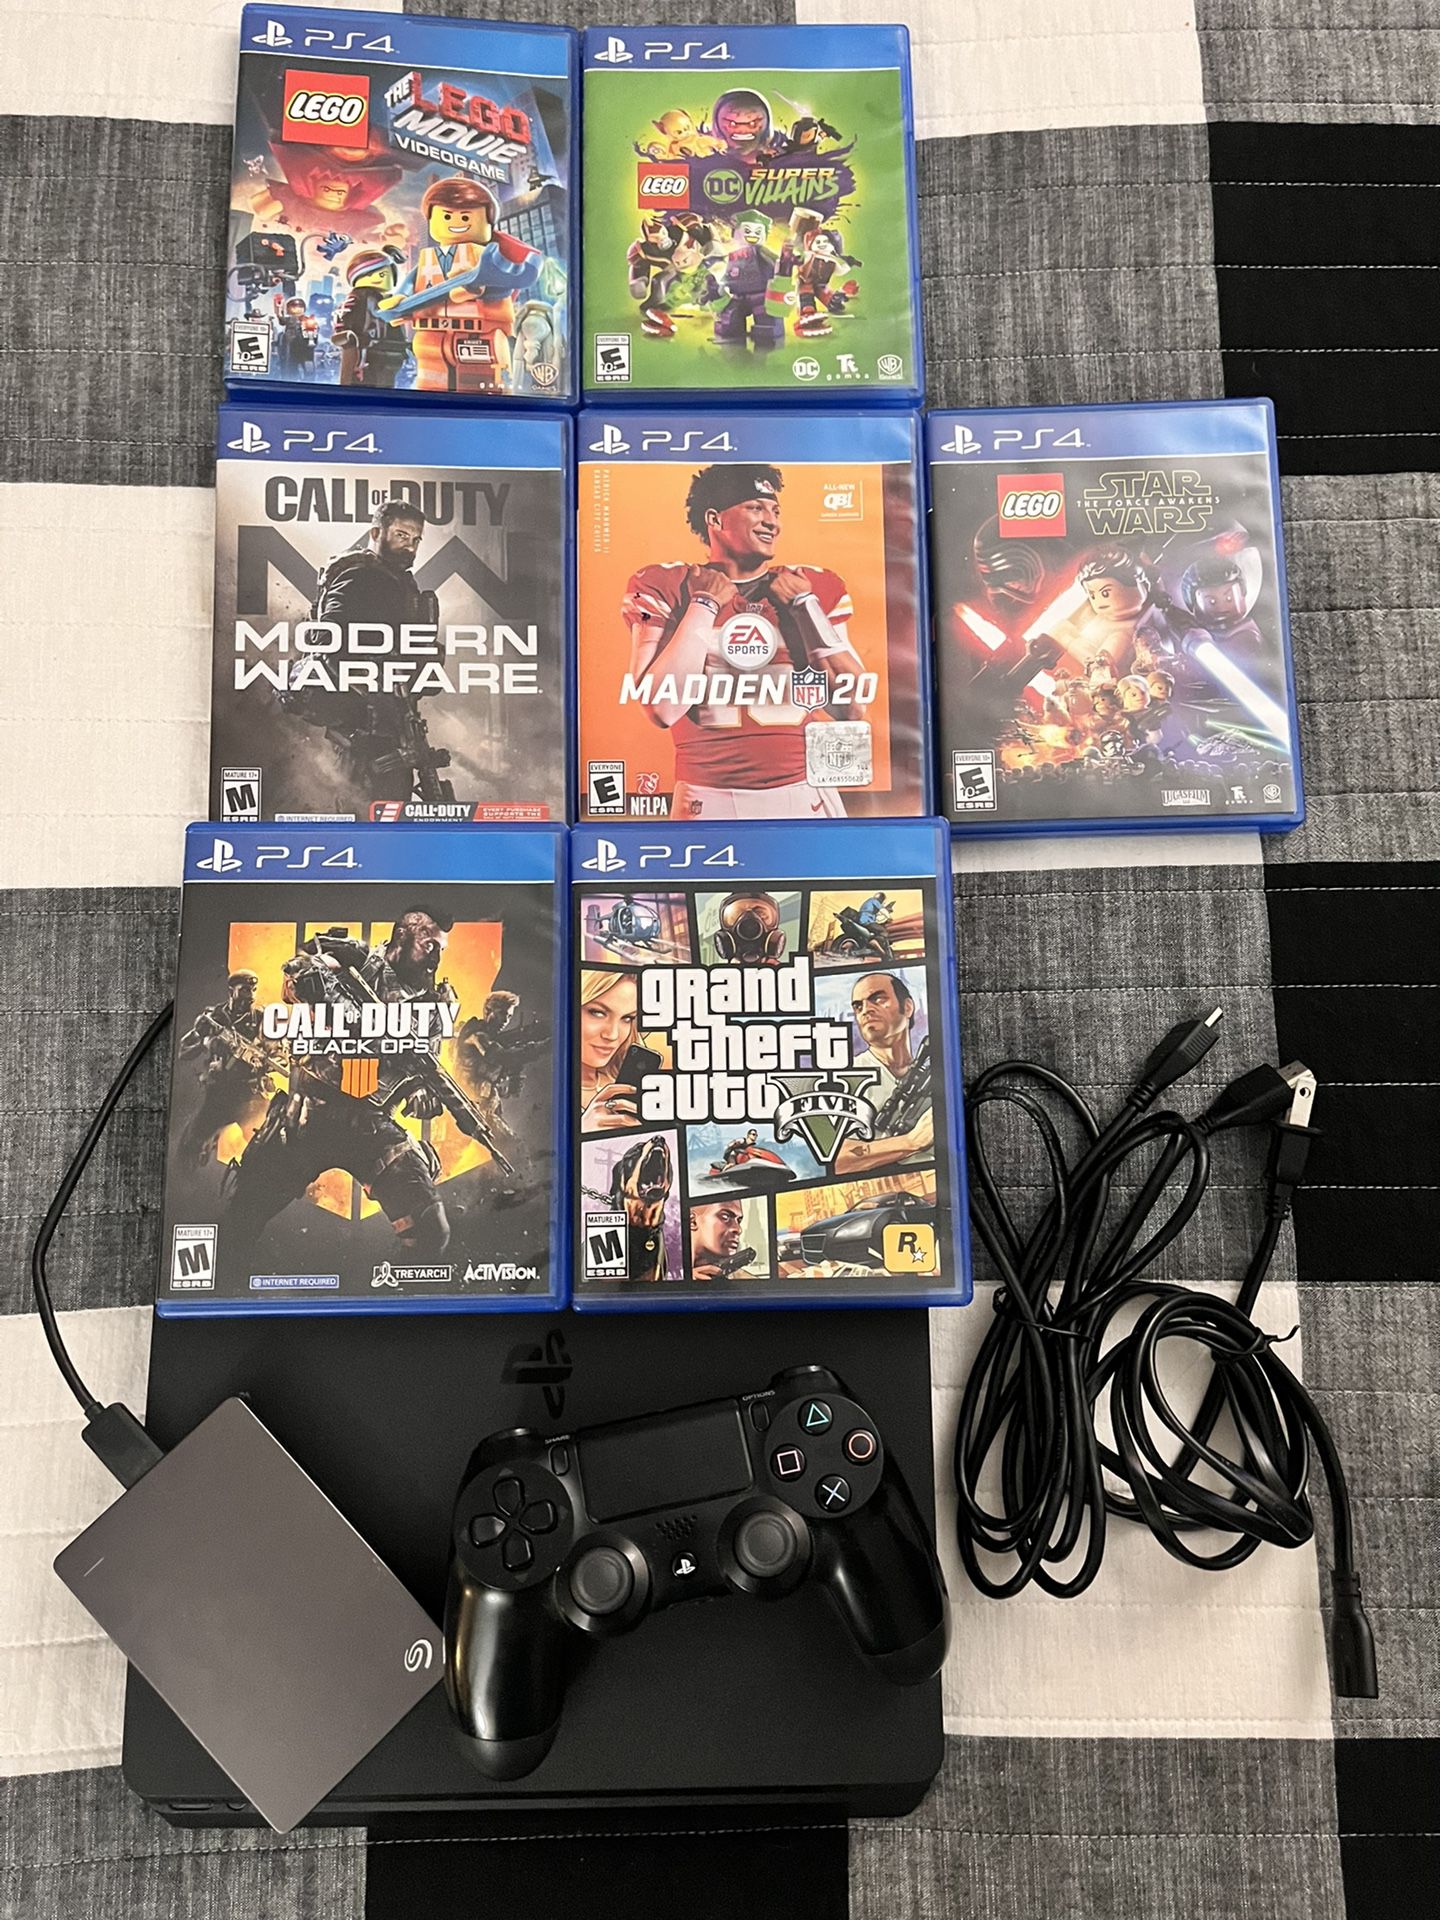 PS4 Slim with controller, External HDD and 7 Games!